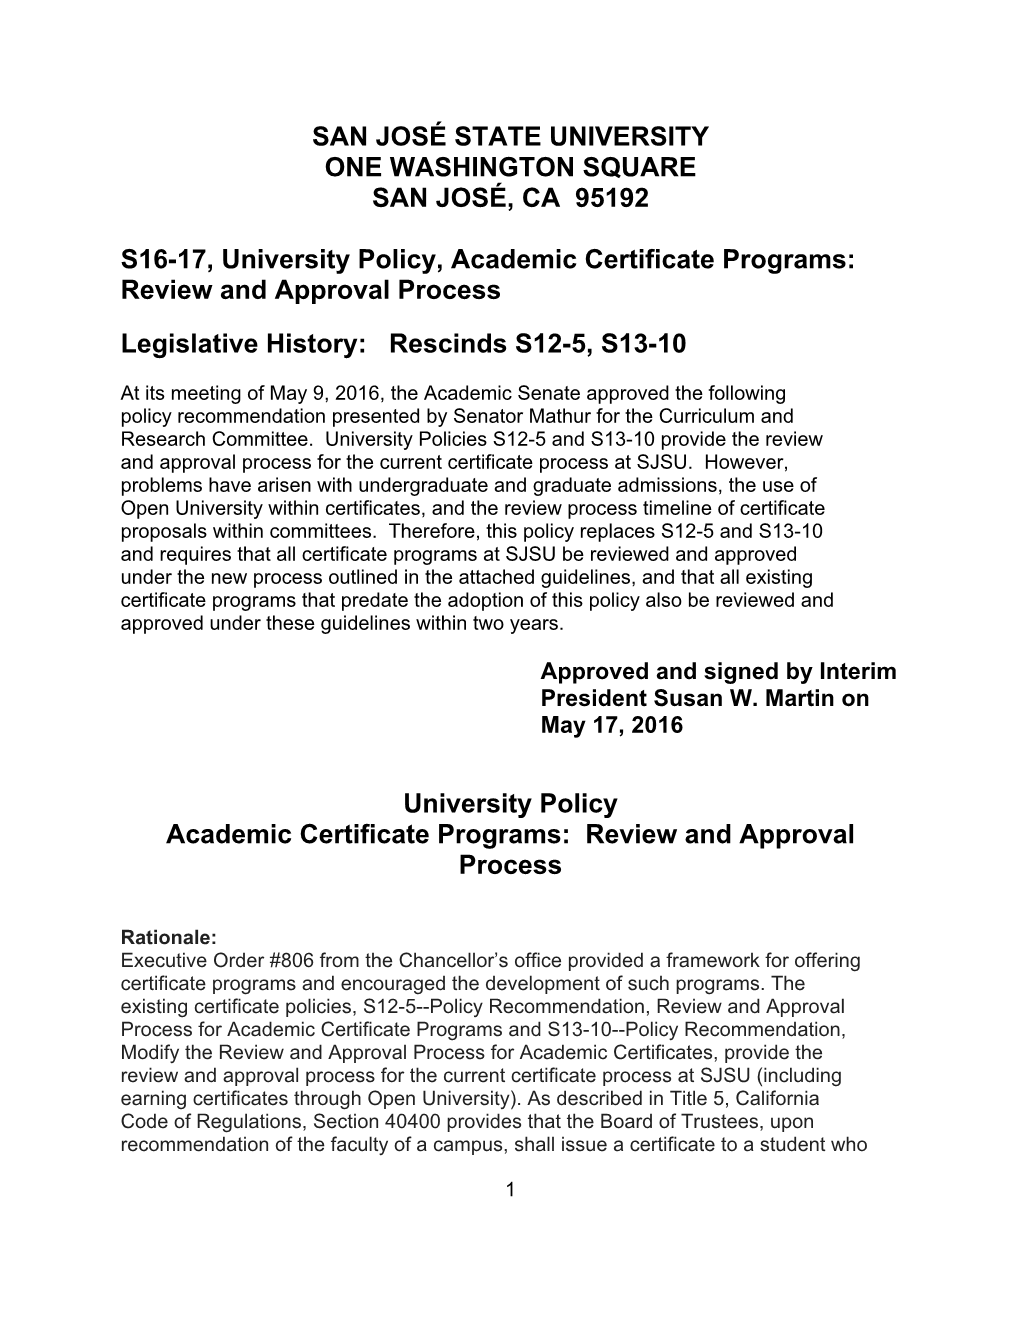 S16-17, University Policy, Academic Certificate Programs: Review and Approval Process